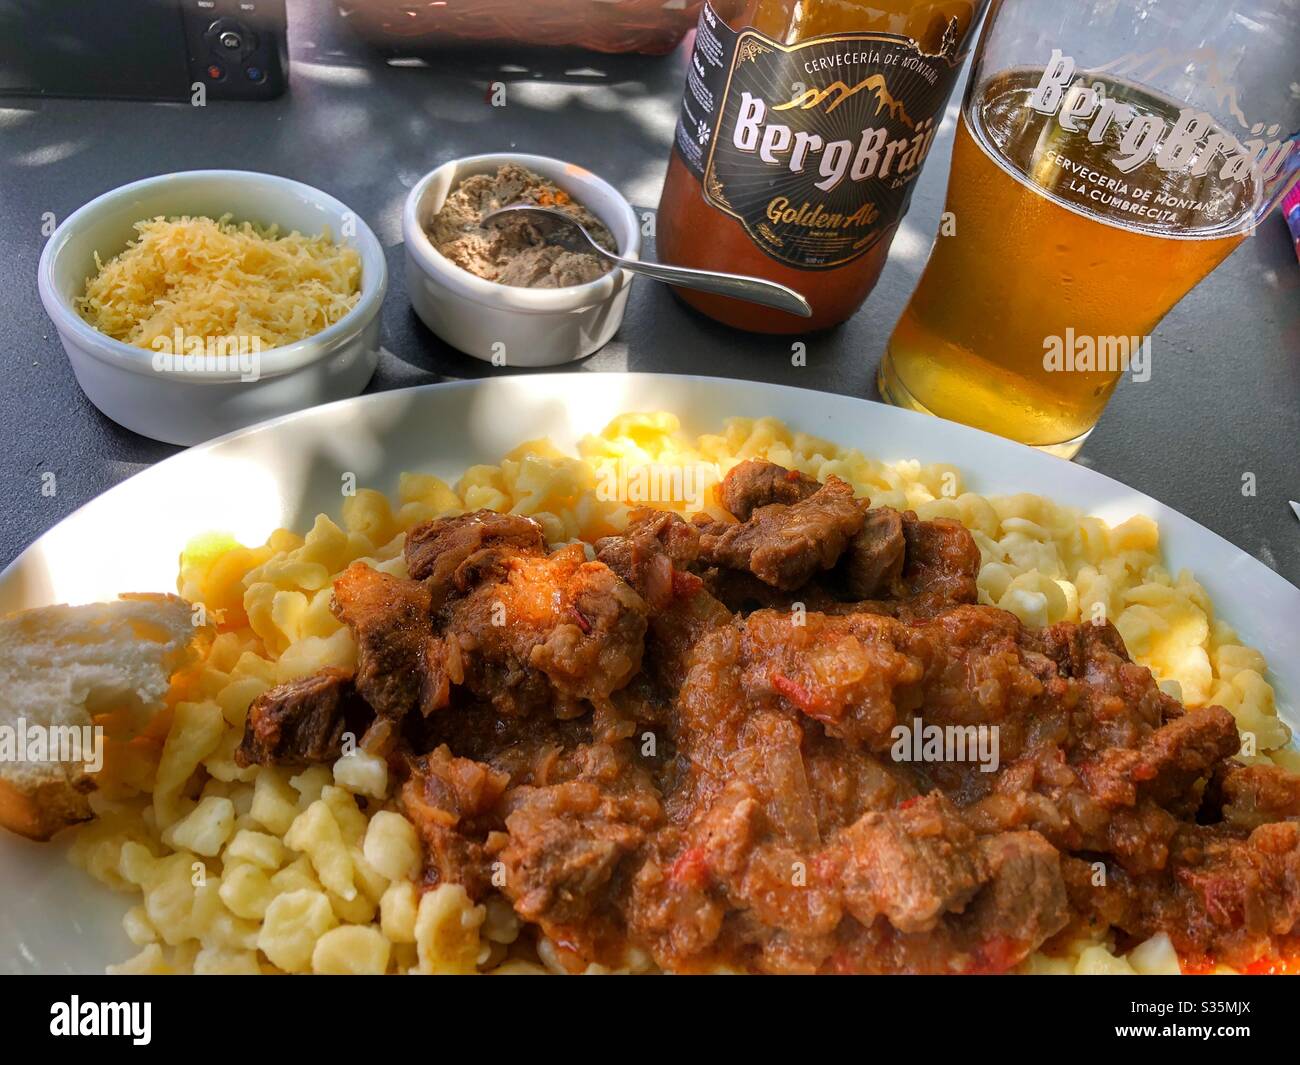 A hearty lunch, goulash and spaetzle, a traditional German meal. Stock Photo